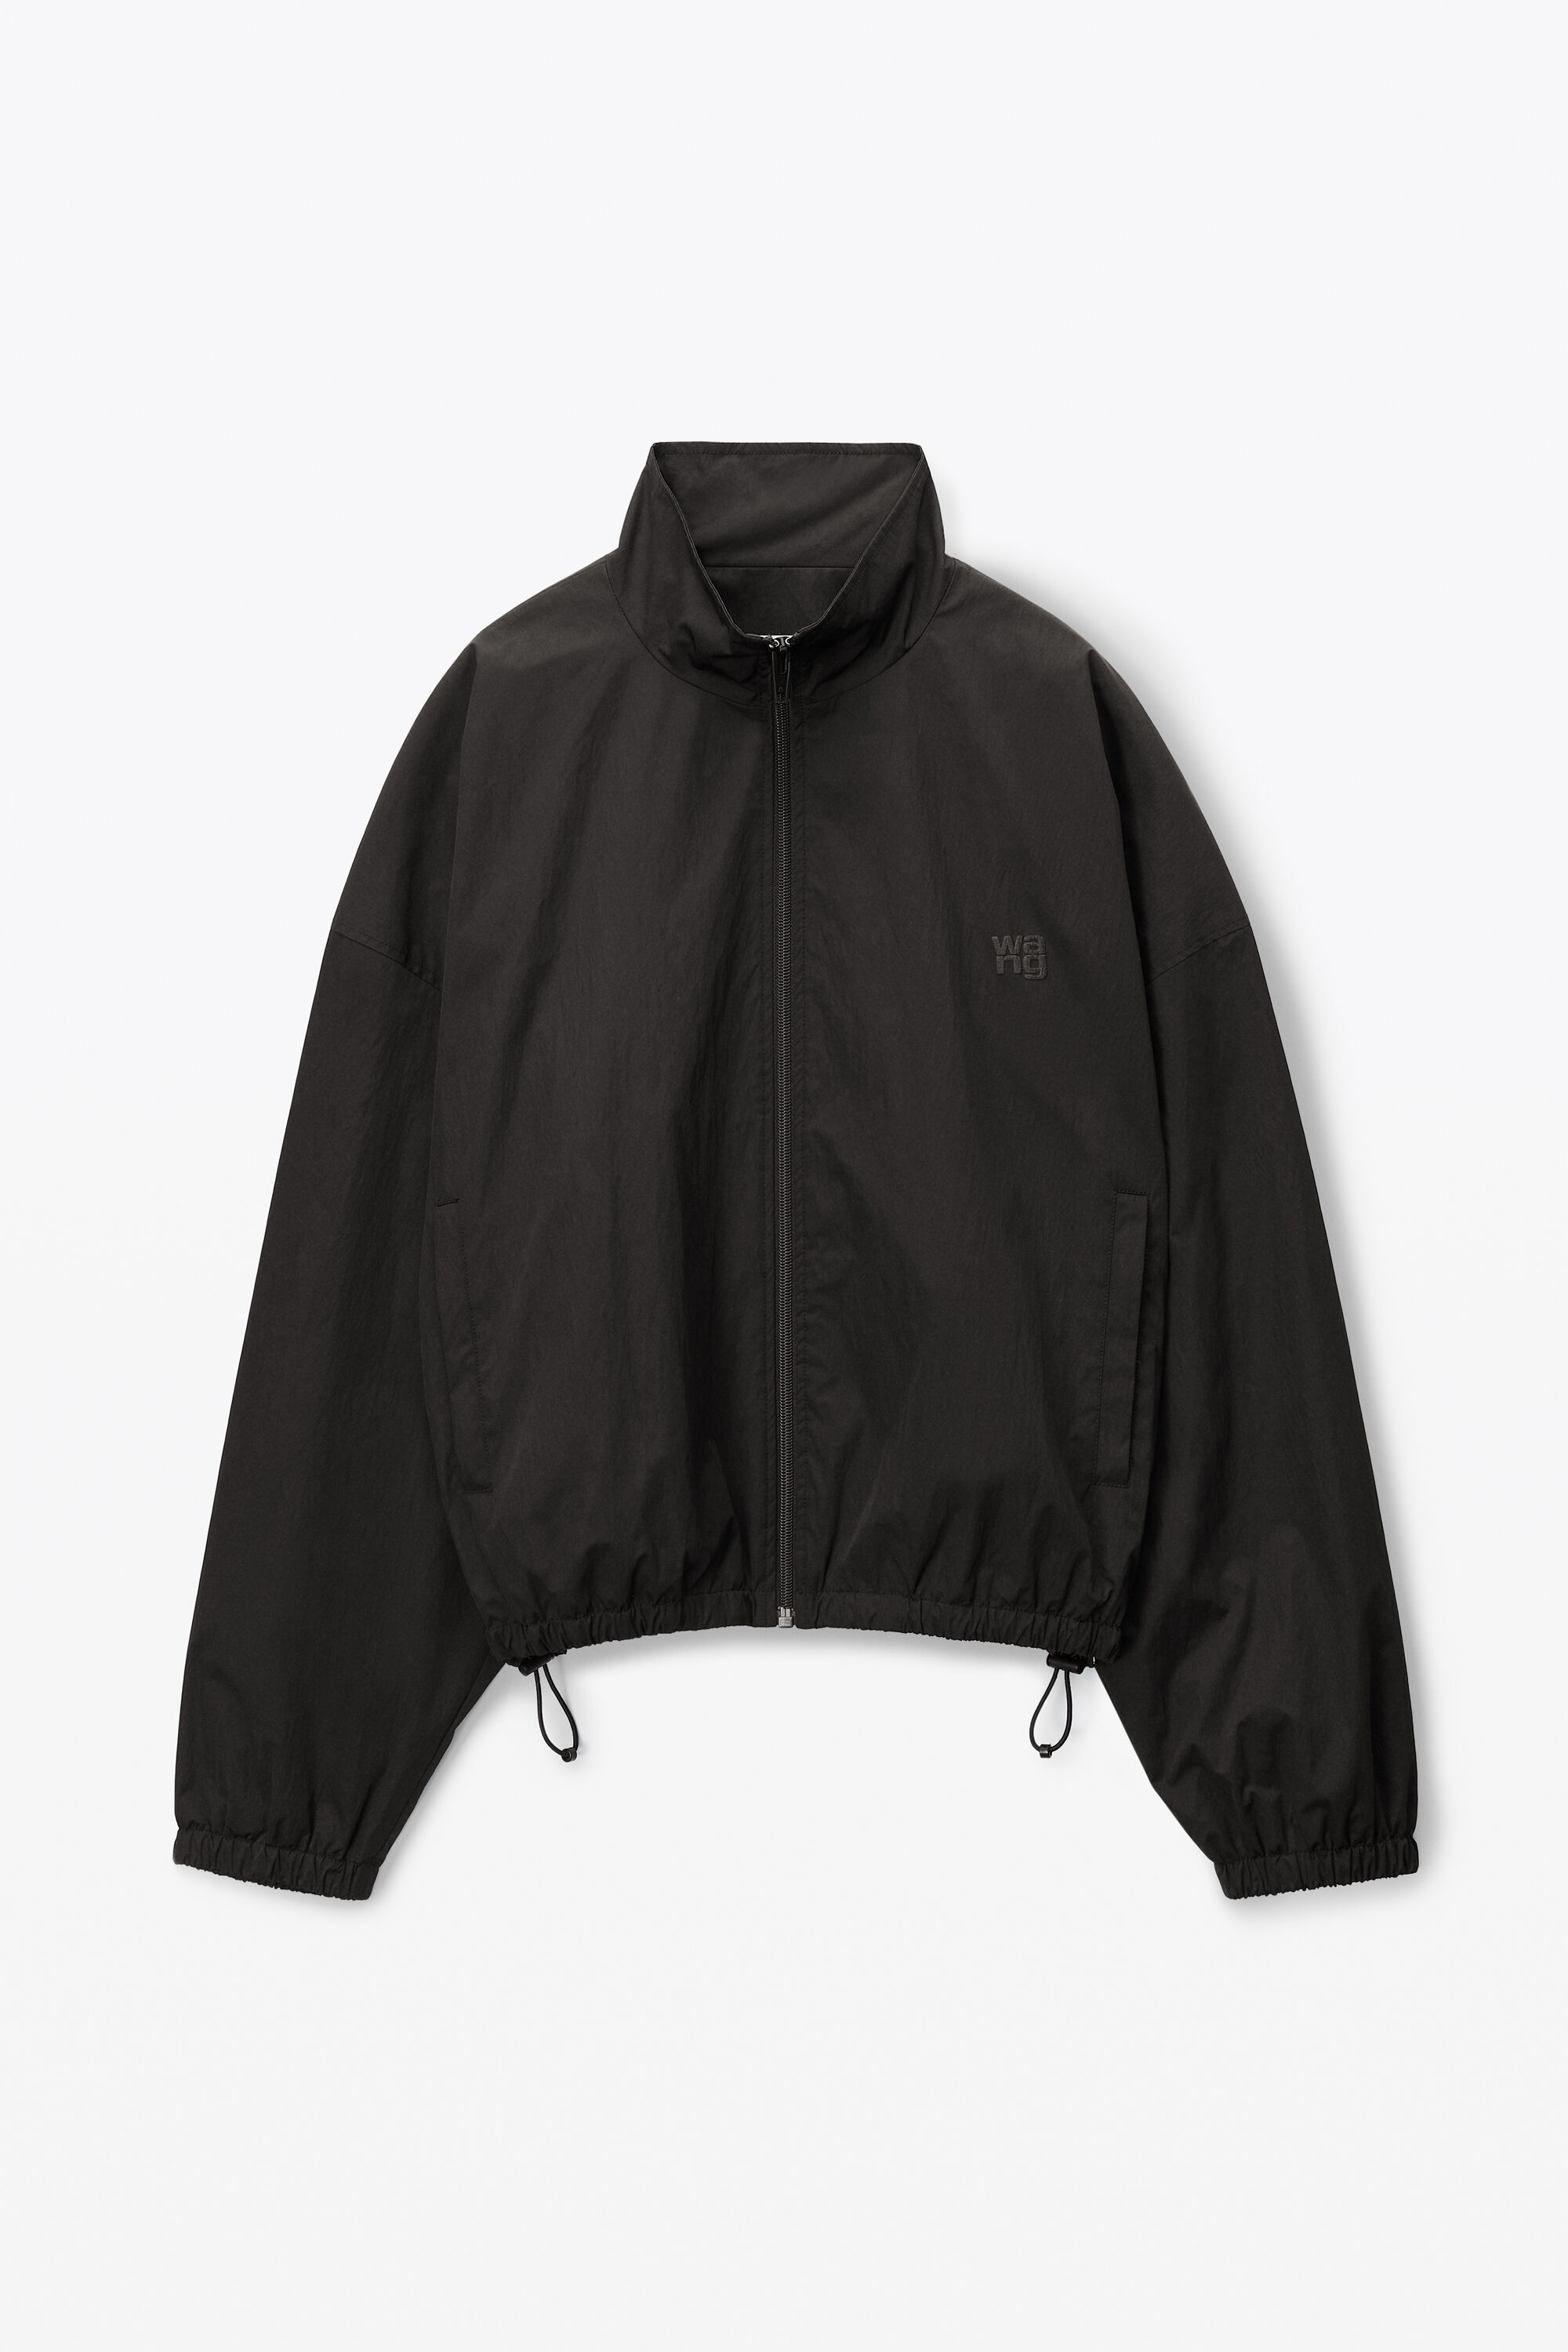 COACHES TRACK JACKET IN NYLON in BLACK | relaxed fit 